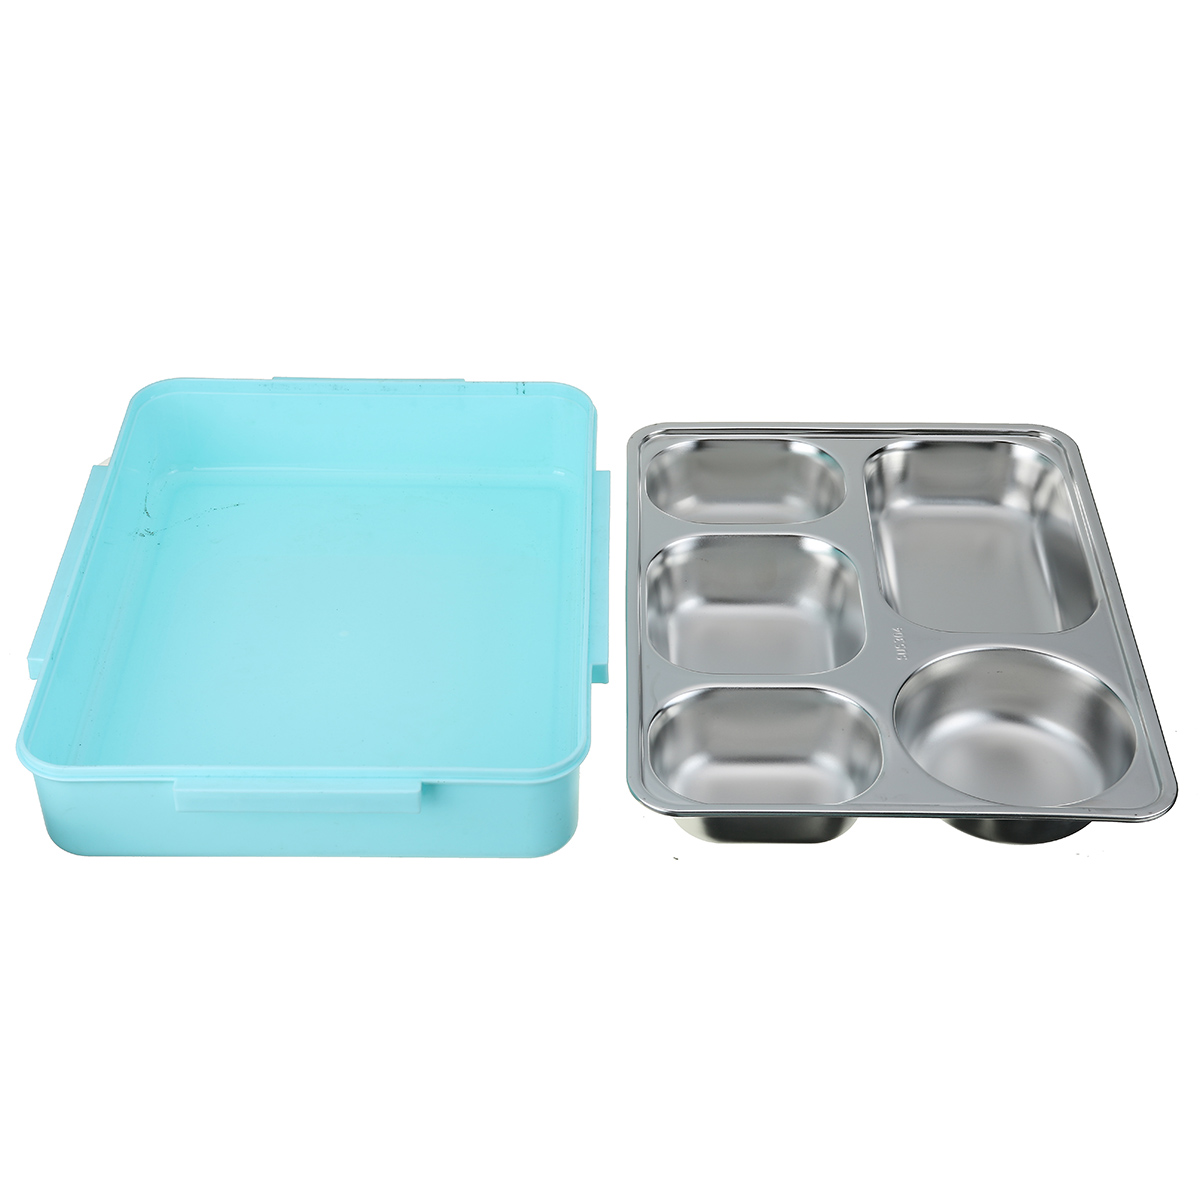 304-Stainless-Steel-Lunch-Box-45-Grid-Leakproof-Food-Container-Outdoor-Camping-Picnic-Kitchen-1787462-8